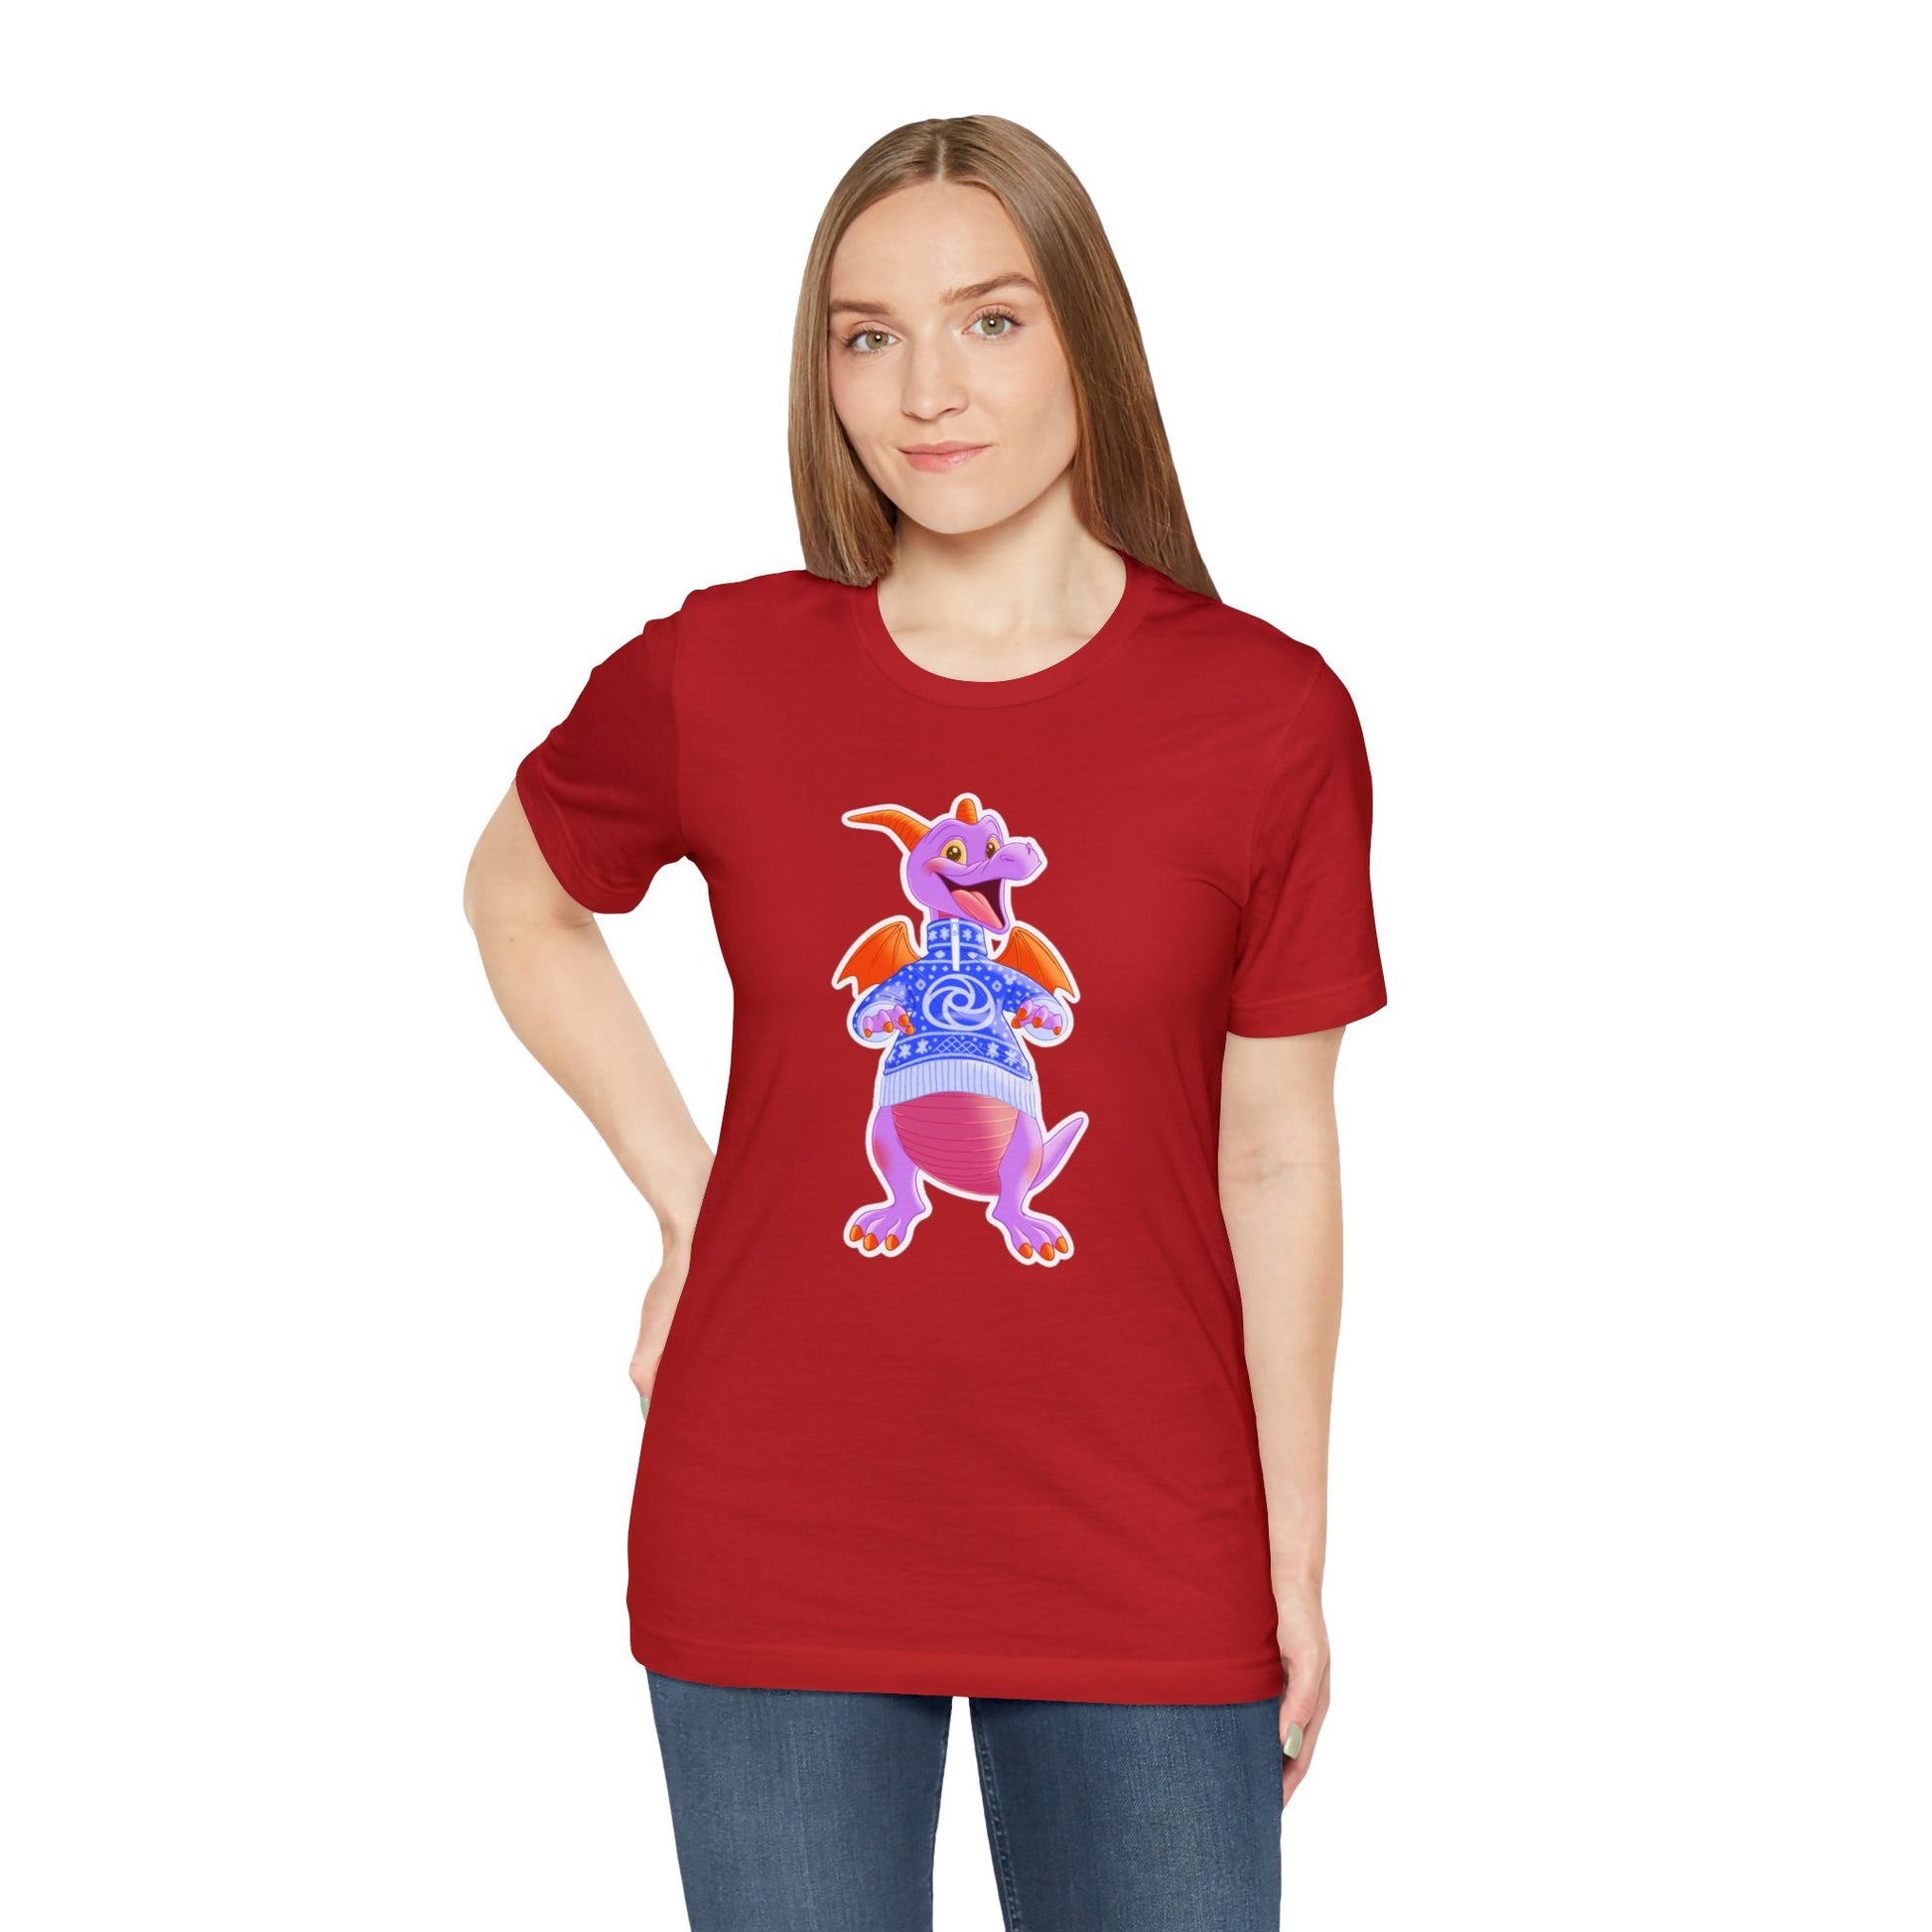 Women's Holiday Figgy Red Tee